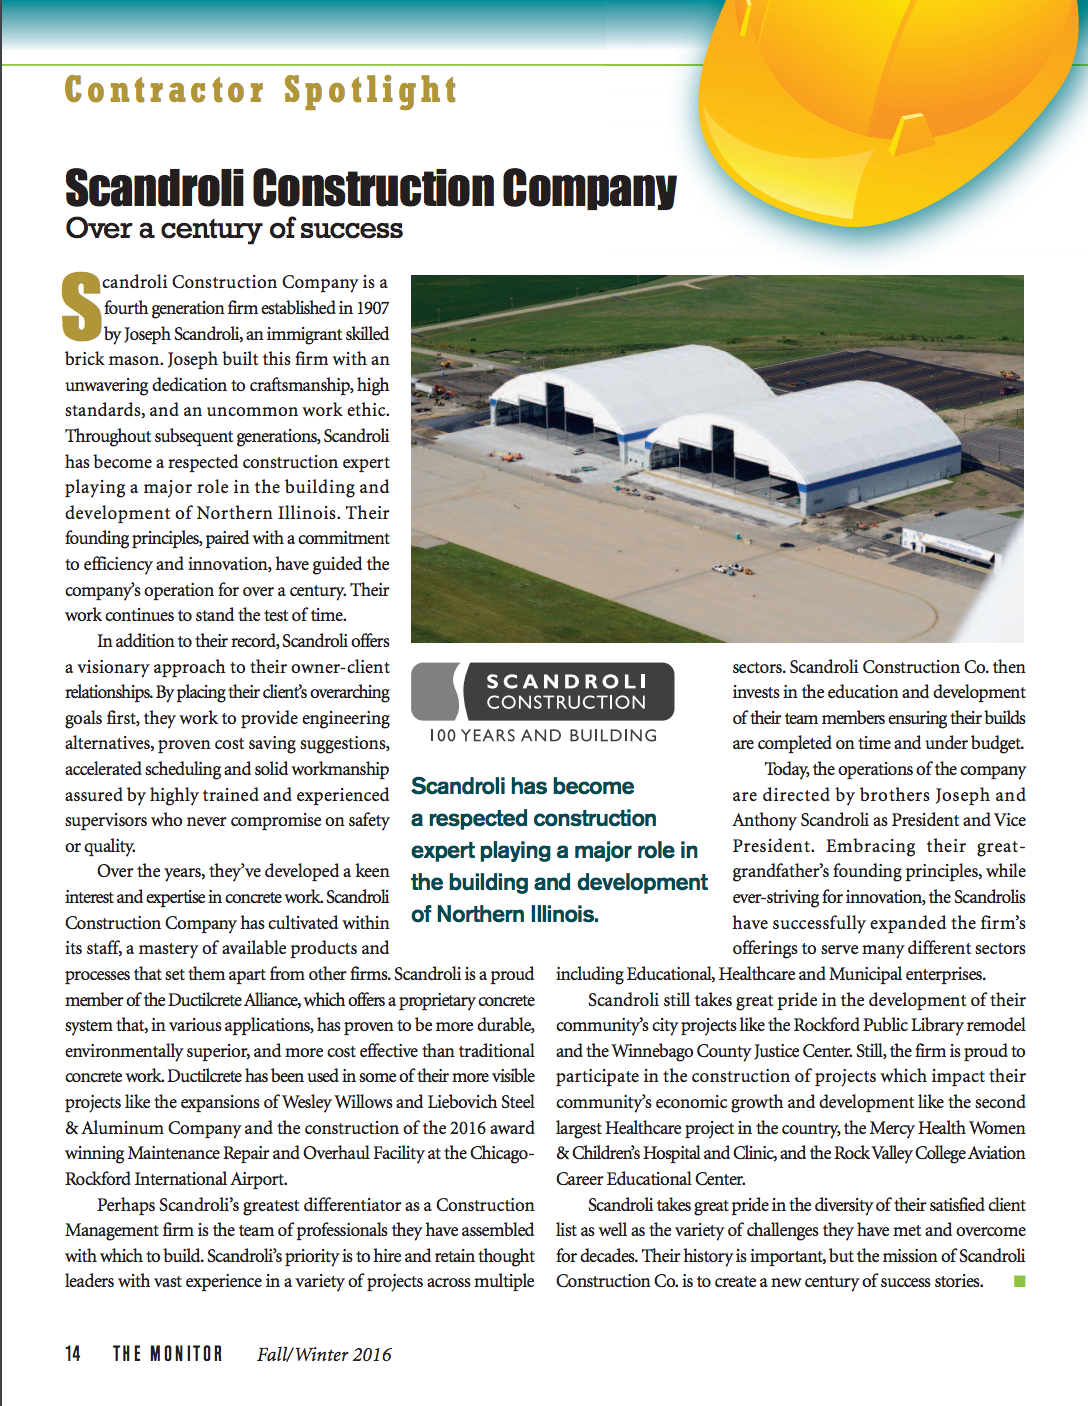 Scandroli Featured in IIIFFC Newsletter, The Monitor